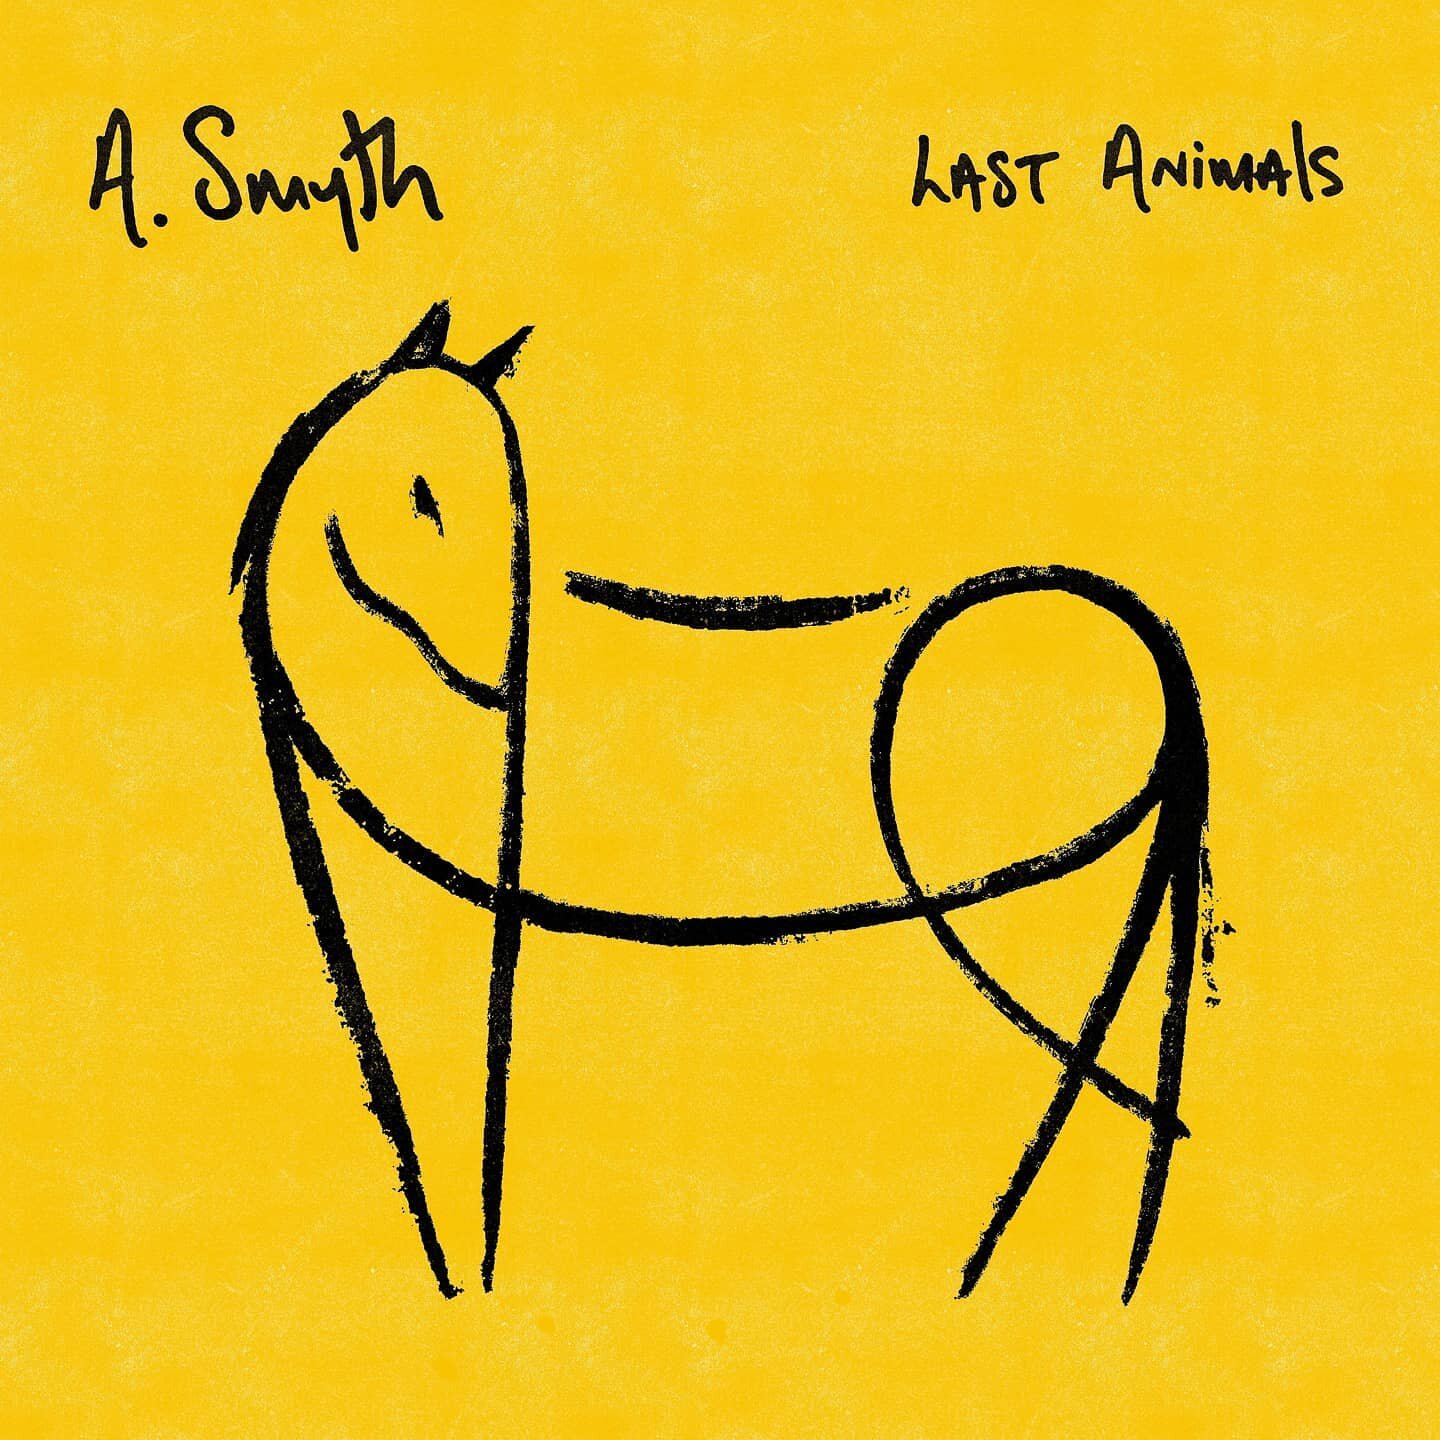 Friends my debut album &quot;Last Animals&quot;

Streaming link in bio

Artwork by @ianclarkedotca
Produced &amp; Mixed by @astakalapa
Mastered by @goldenmastering
Drums &amp; Additional Production by @donachao 
Bass by @diplah
Piano by @ryanhargadon